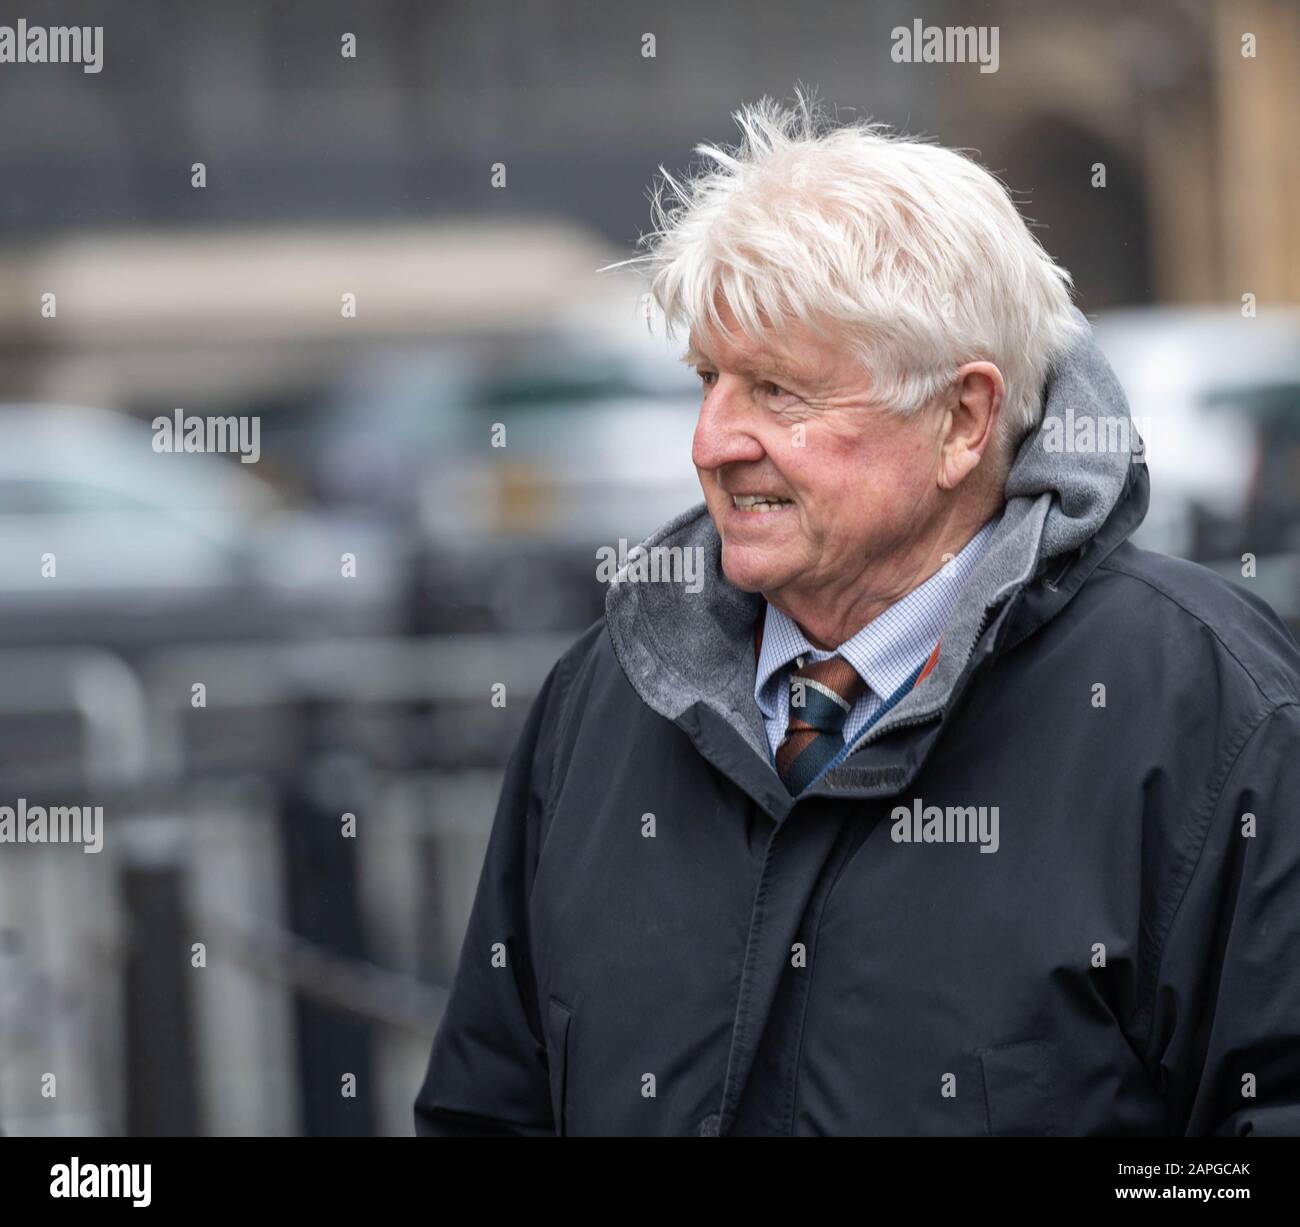 London 22nd Jan. 2020 Stanley Johnson, Father of Boris Johnson MP PC Prime Minister arrives at Parliament for Prime Ministers Questions Credit: Ian Davidson/Alamy Live News Stock Photo